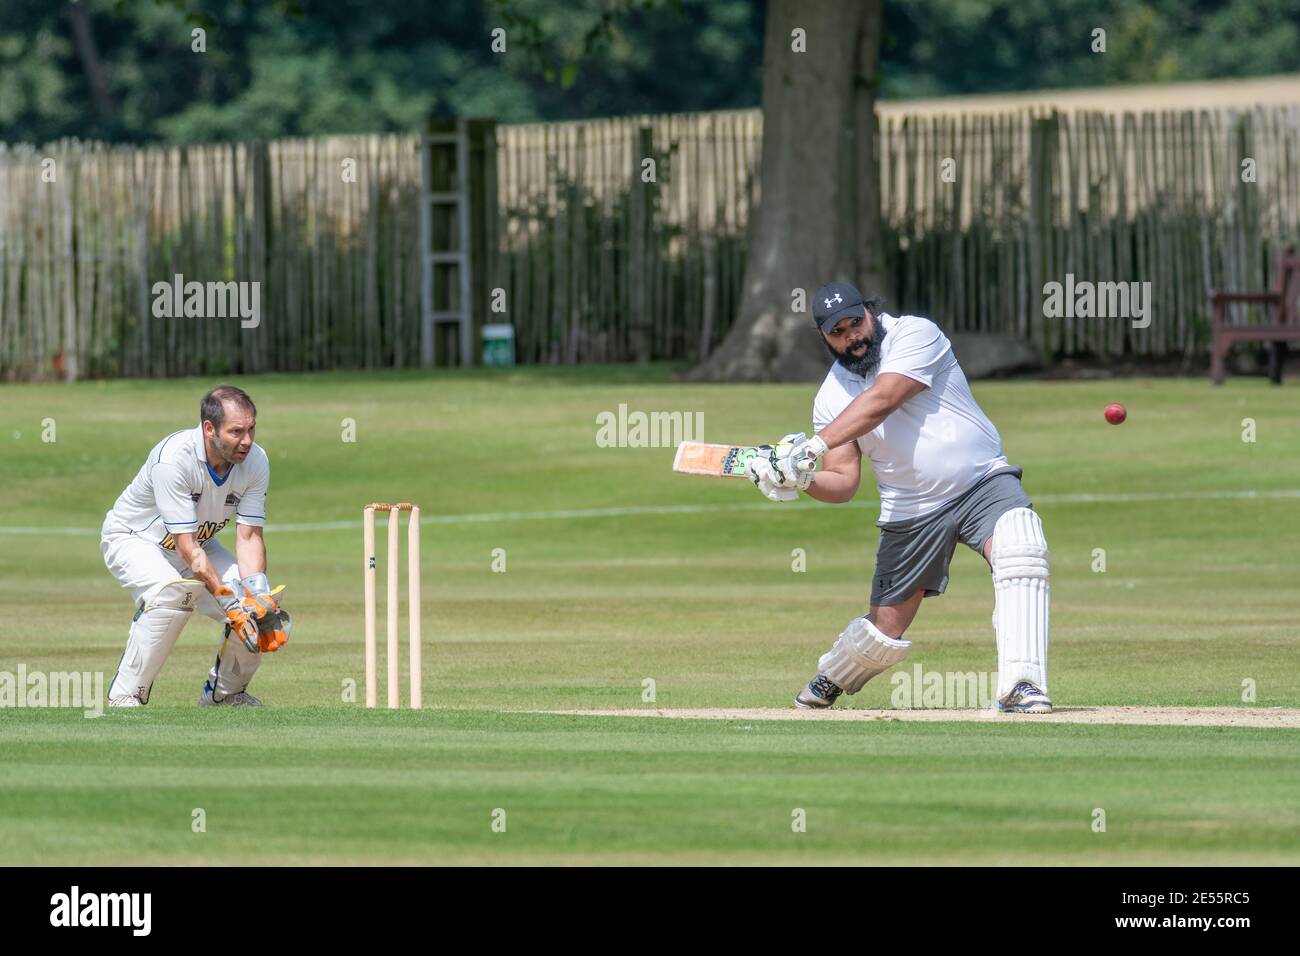 Batter prepares to swing out to hit cricket ball as wicket keeper reaches out for the catch at amateur cricket in Perth, Scotland. Stock Photo